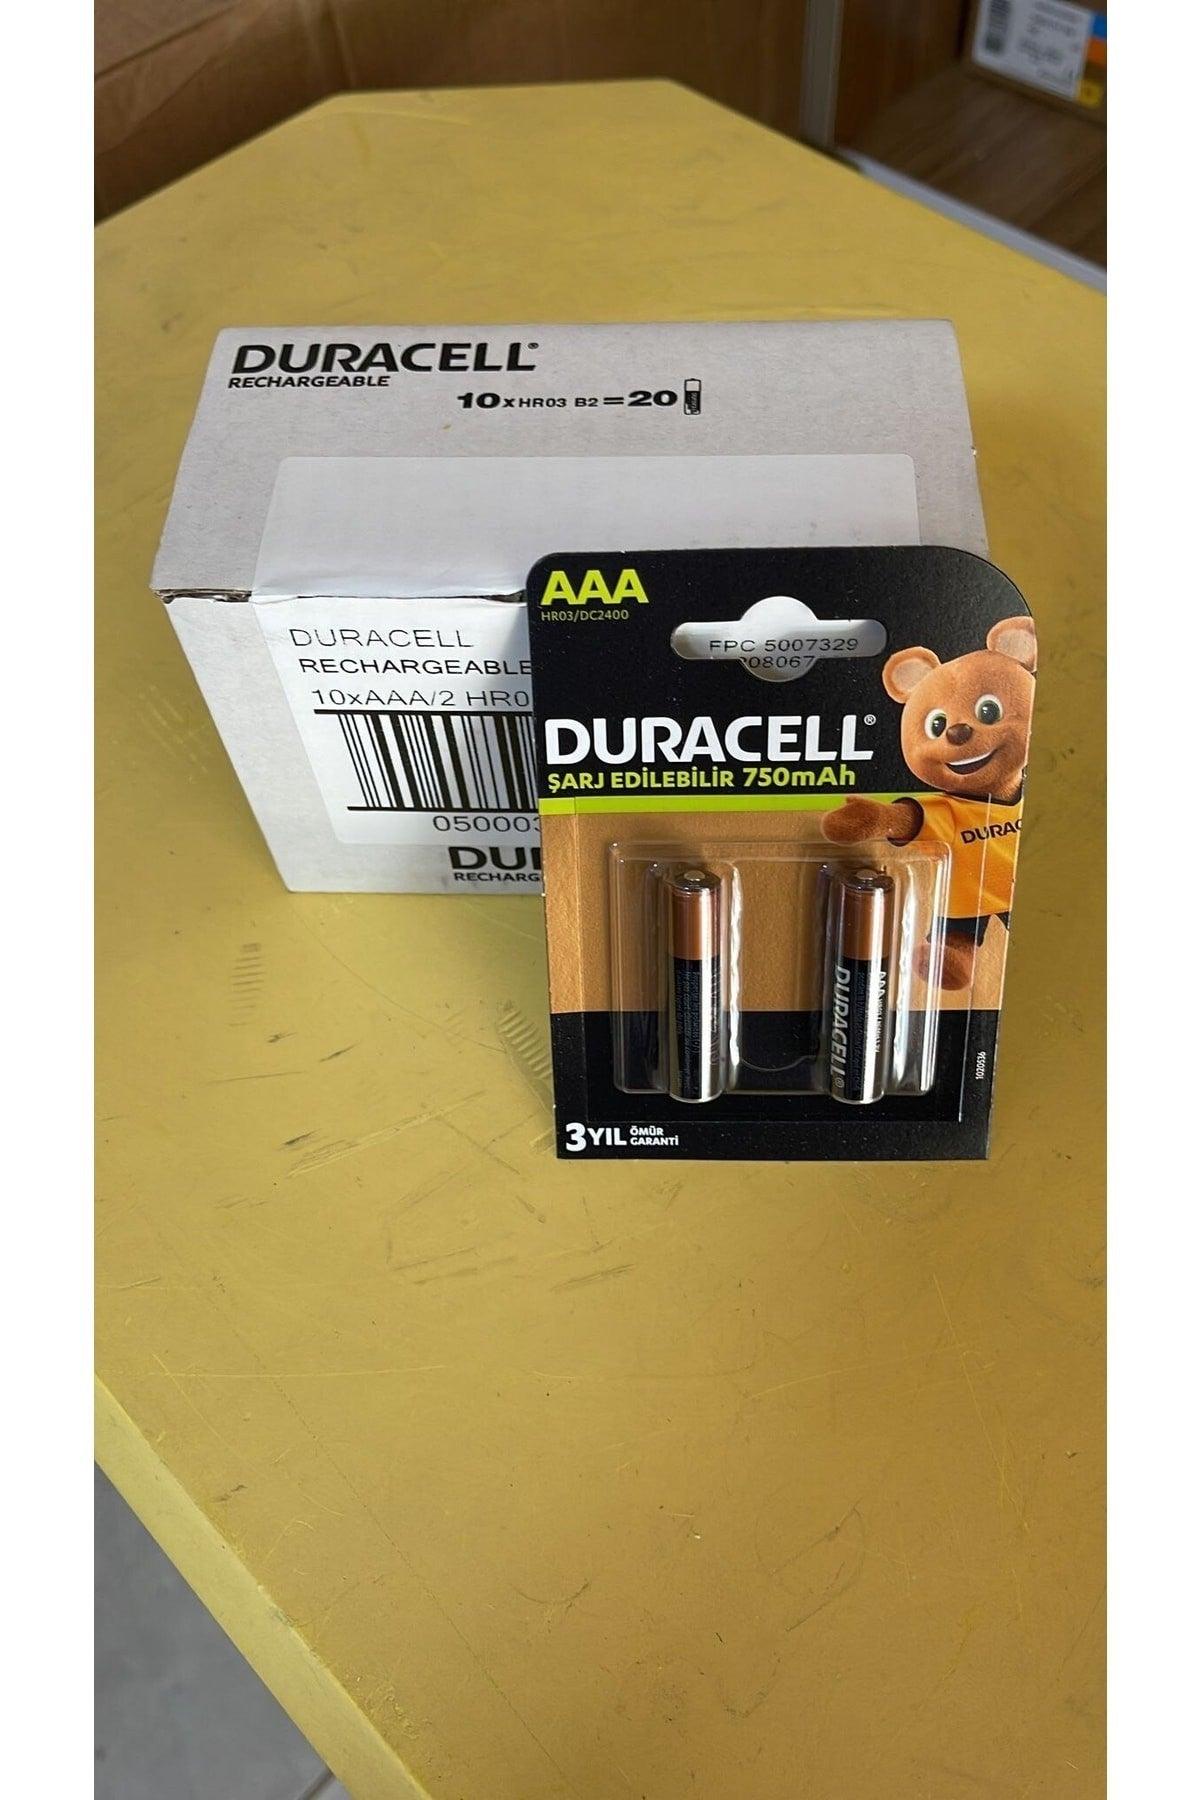 Duracell Rechargeable AAA Slim Pen Battery